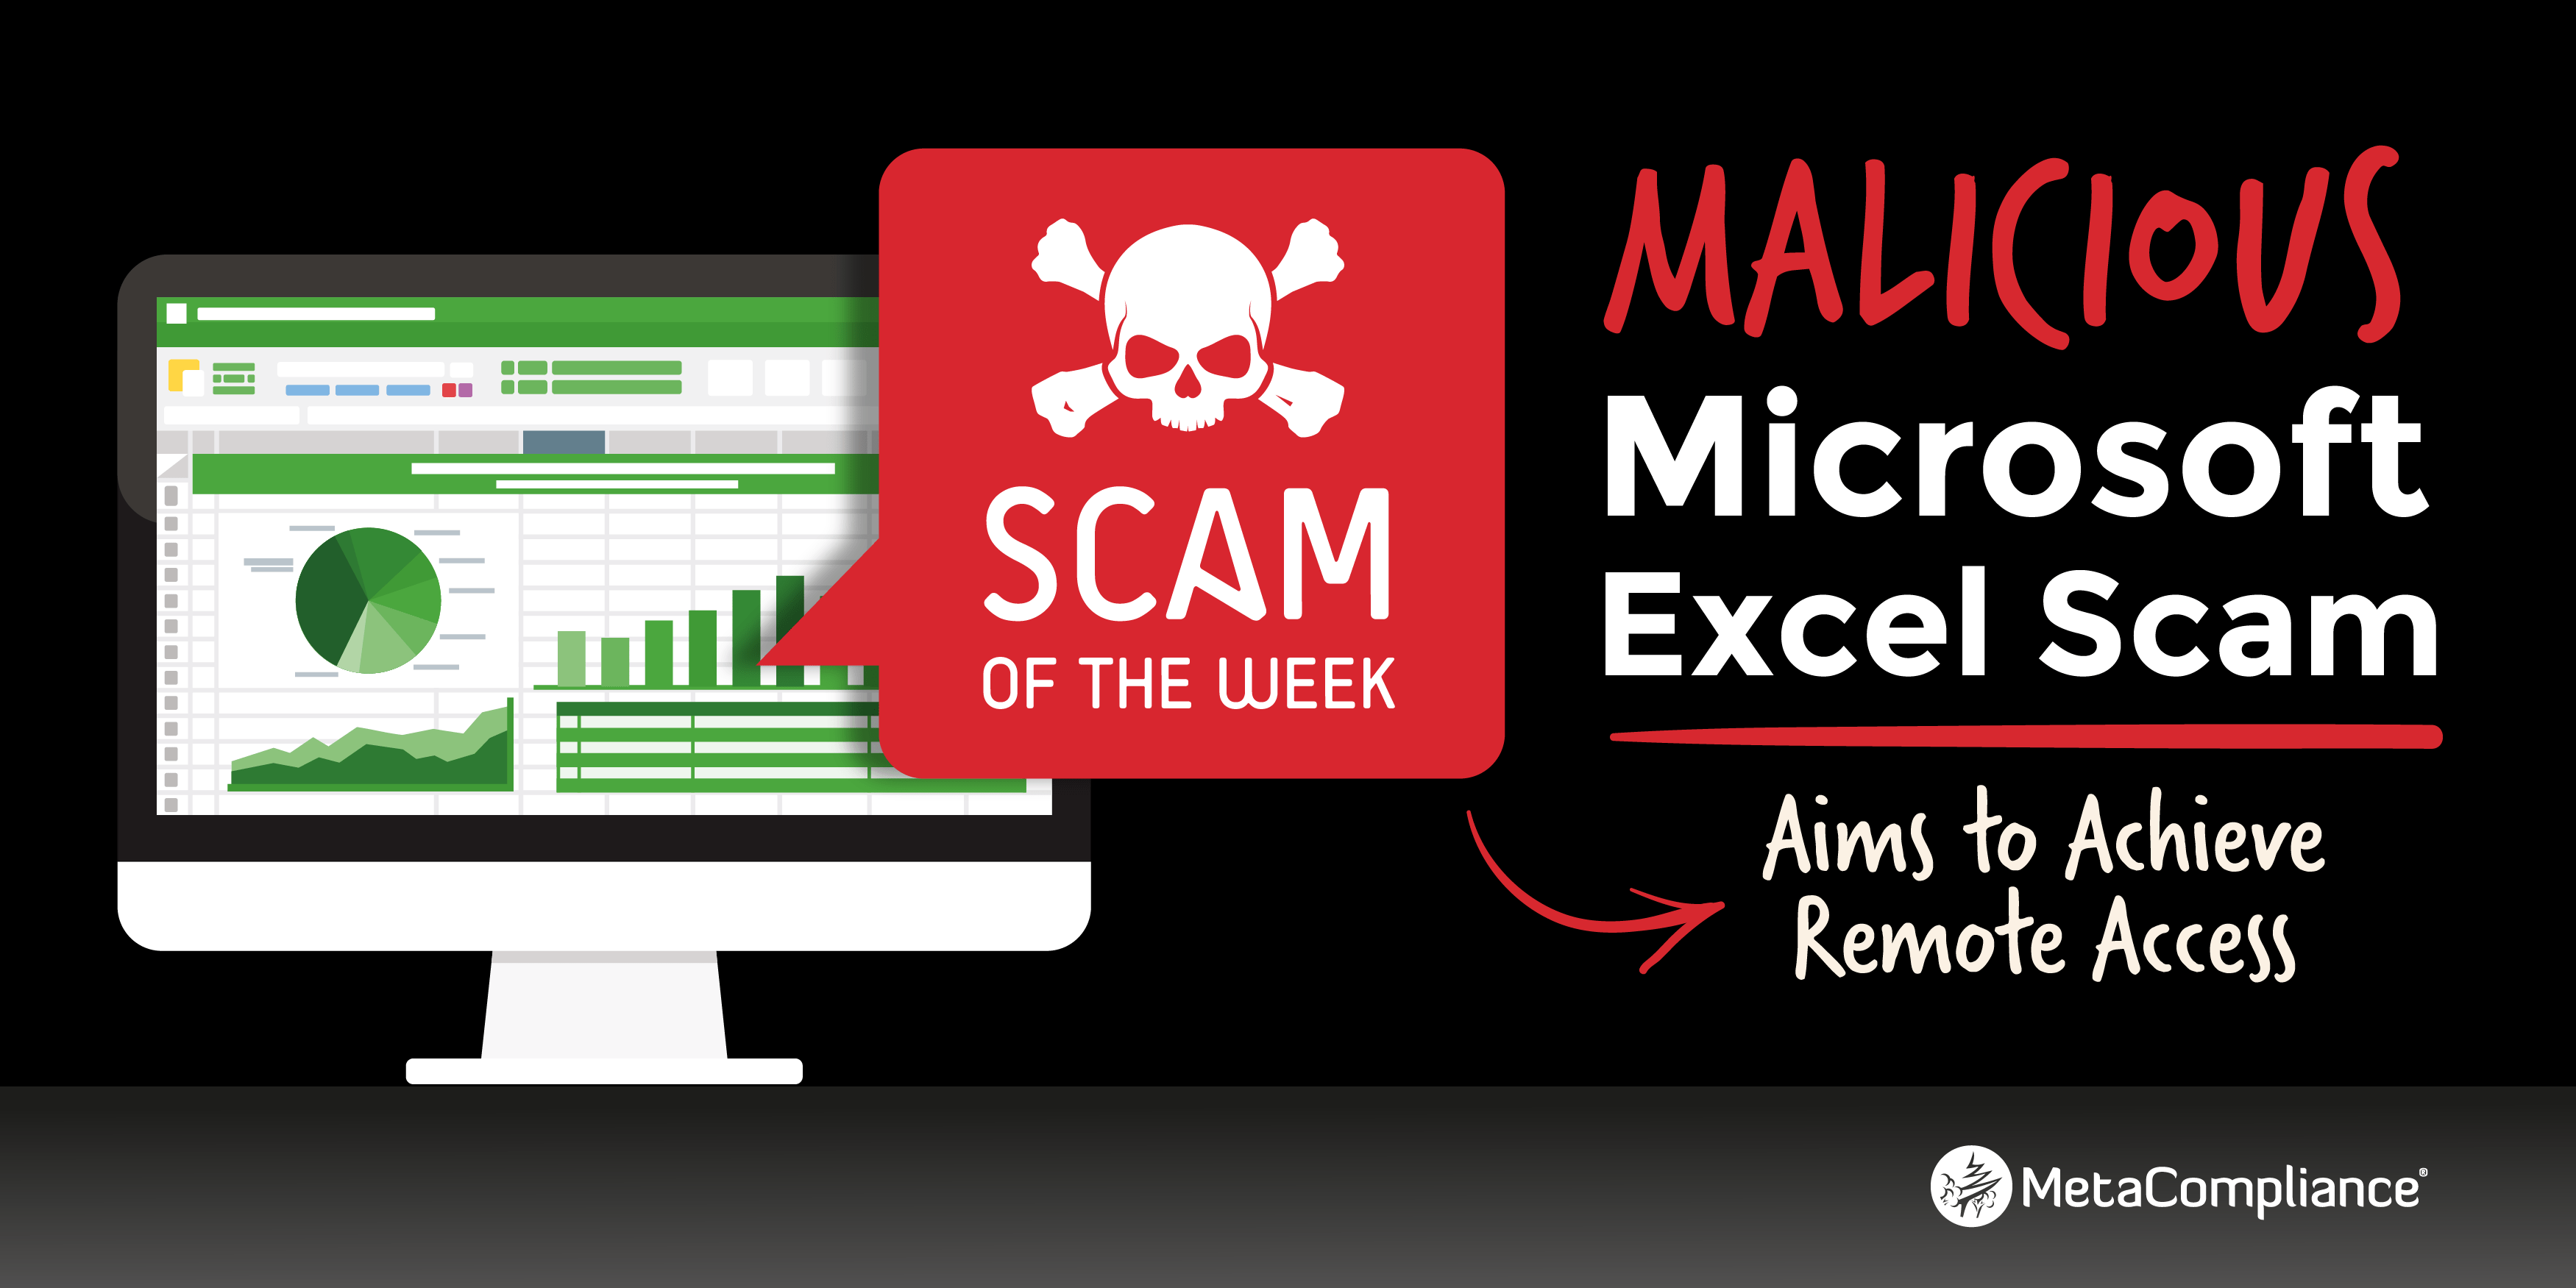 Malicious Microsoft Excel Scam Aims to Achieve Remote Access